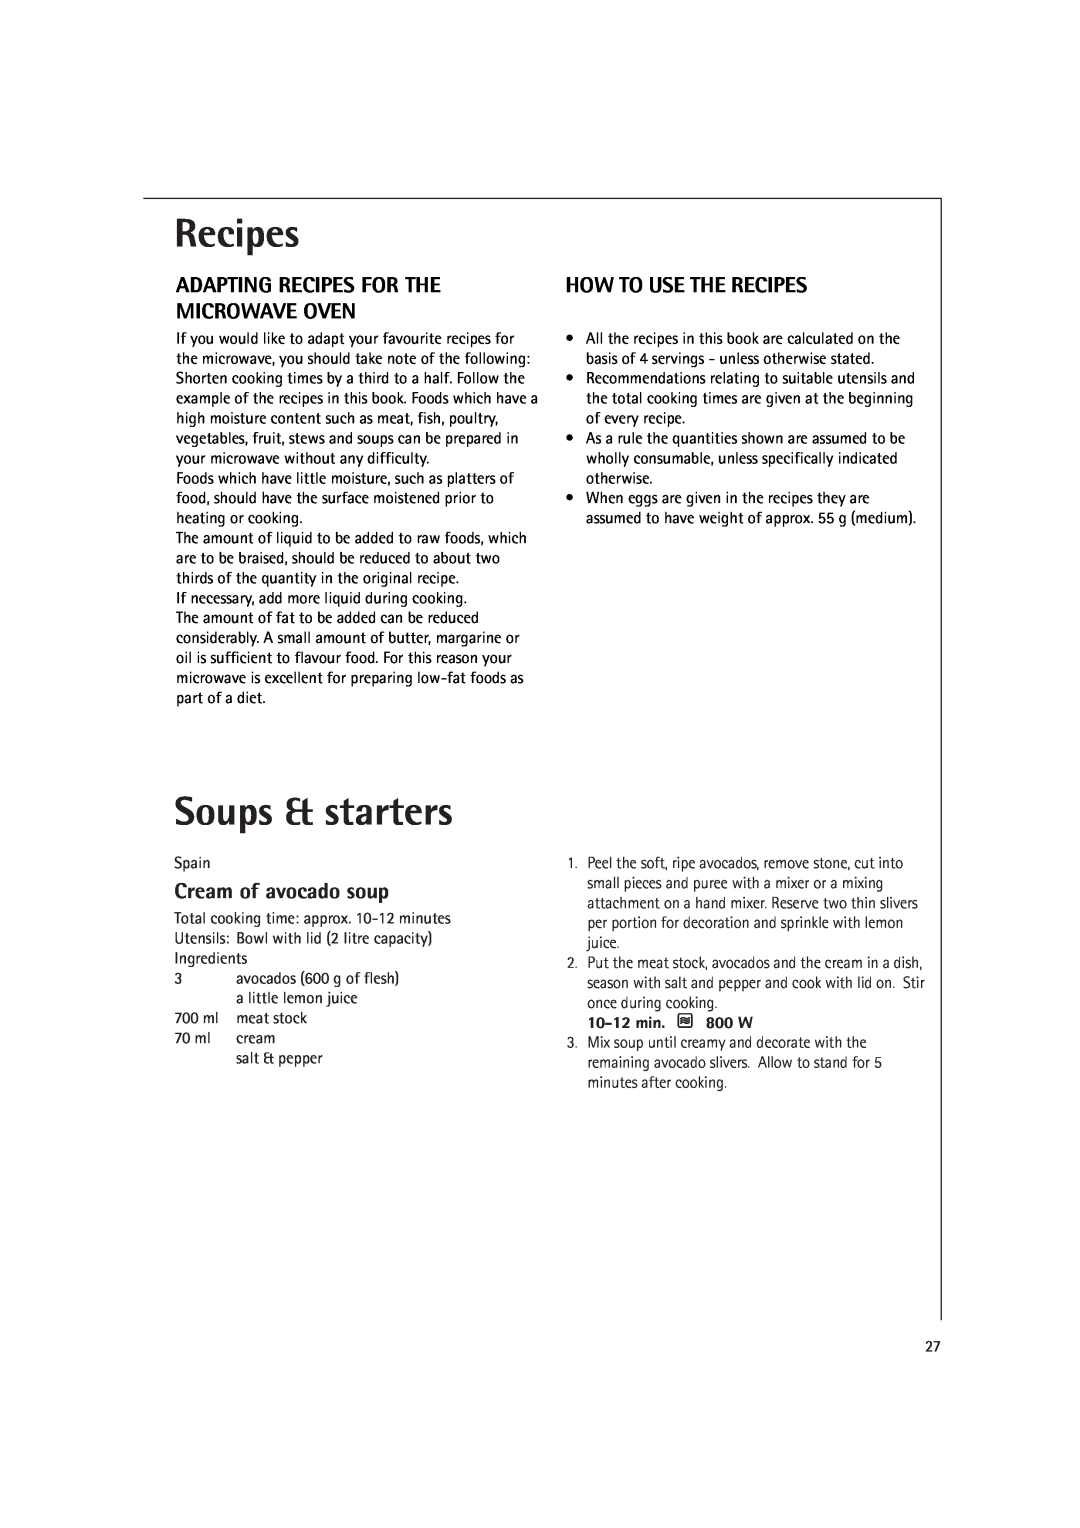 AEG MCD1751E Soups & starters, Adapting Recipes For The Microwave Oven, How To Use The Recipes, Cream of avocado soup 